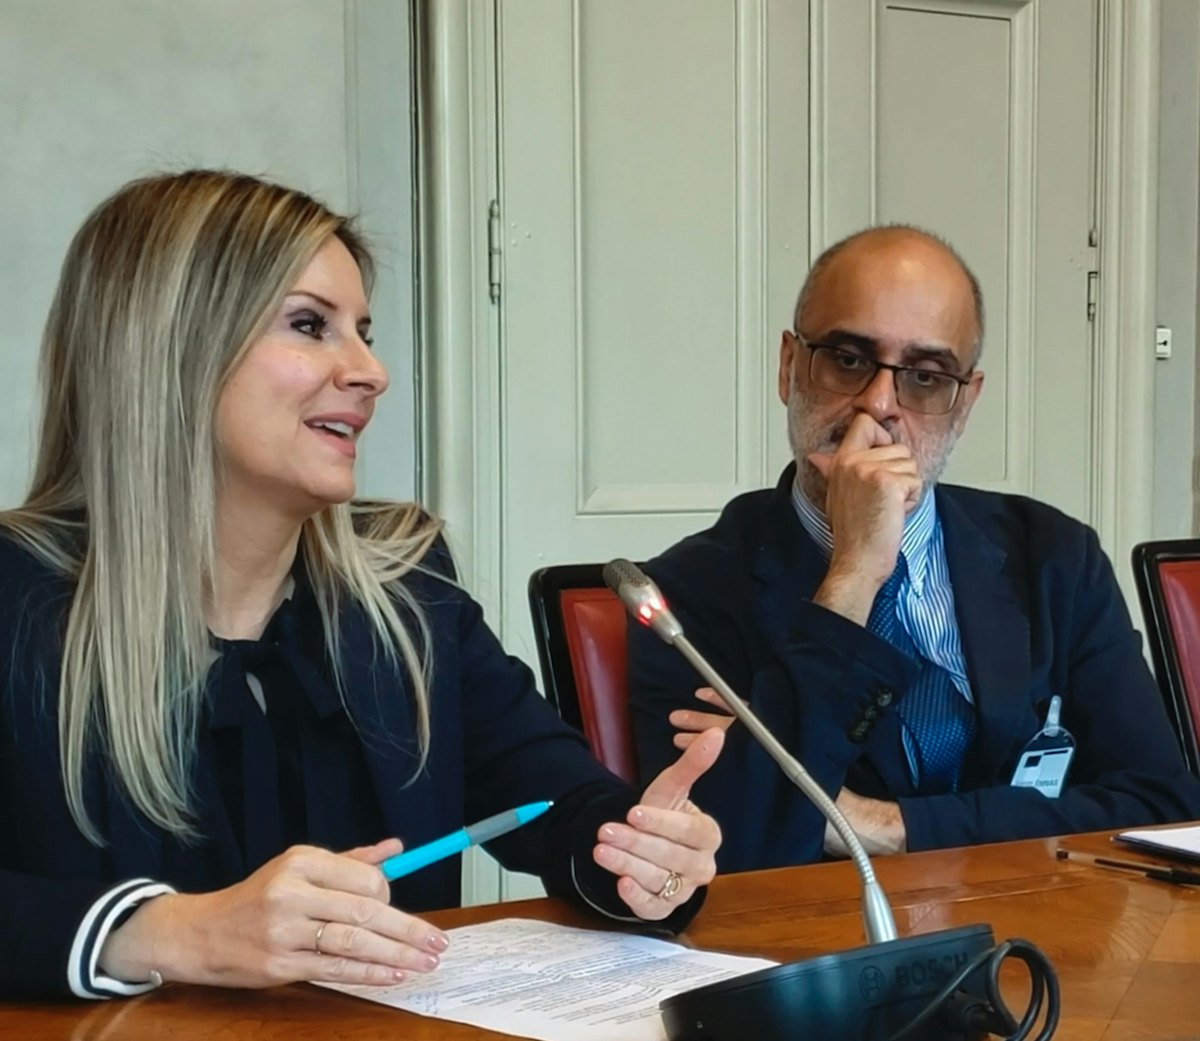 Rachel Bayani of the Brussels Office (left), and Kishan Manocha, Head of Tolerance and Non-Discrimination Department, Organization for Security and Co-operation in Europe (right).